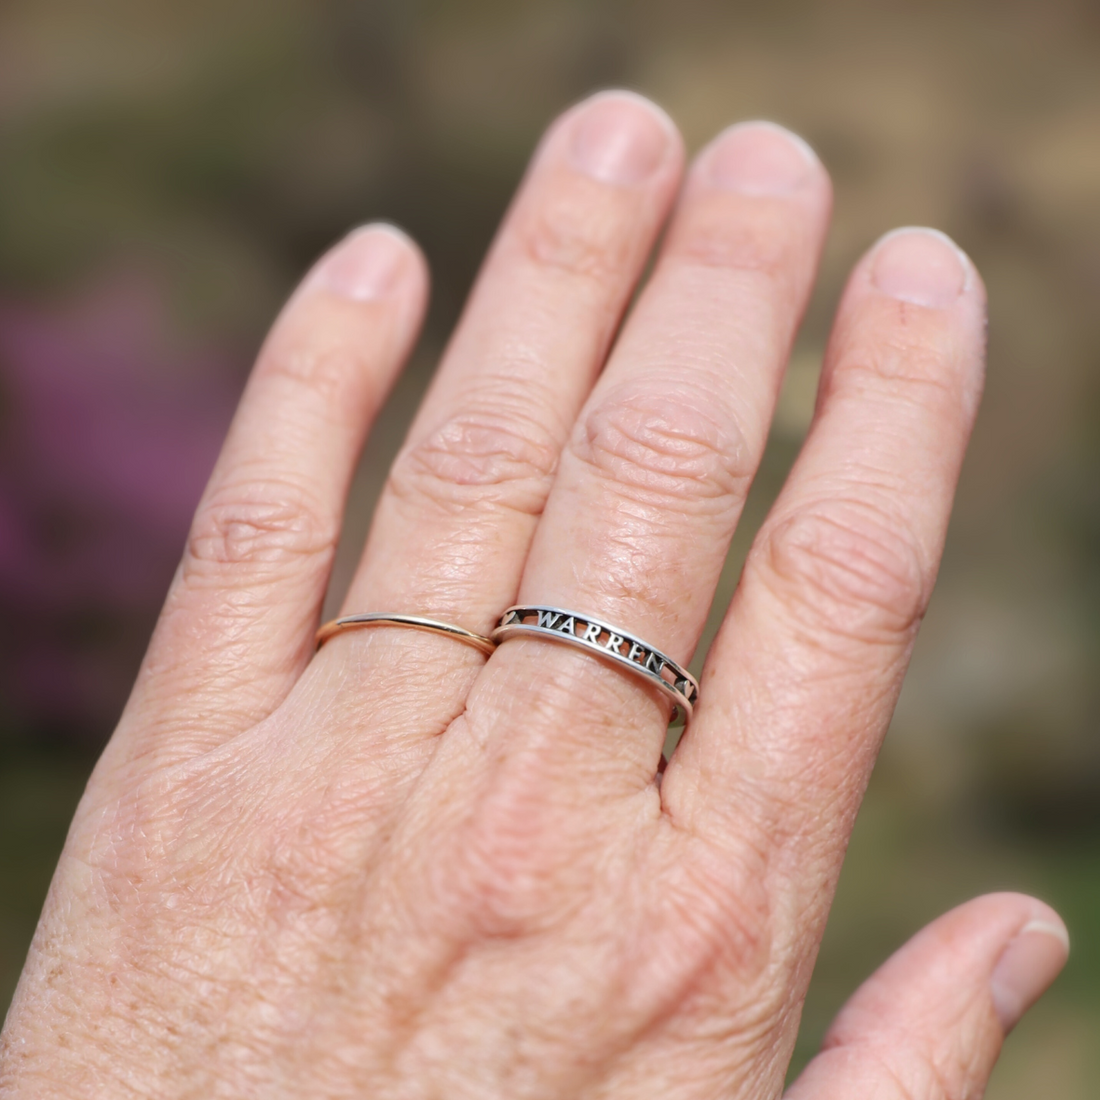 Avery Smooth Stacking Everyday Ring